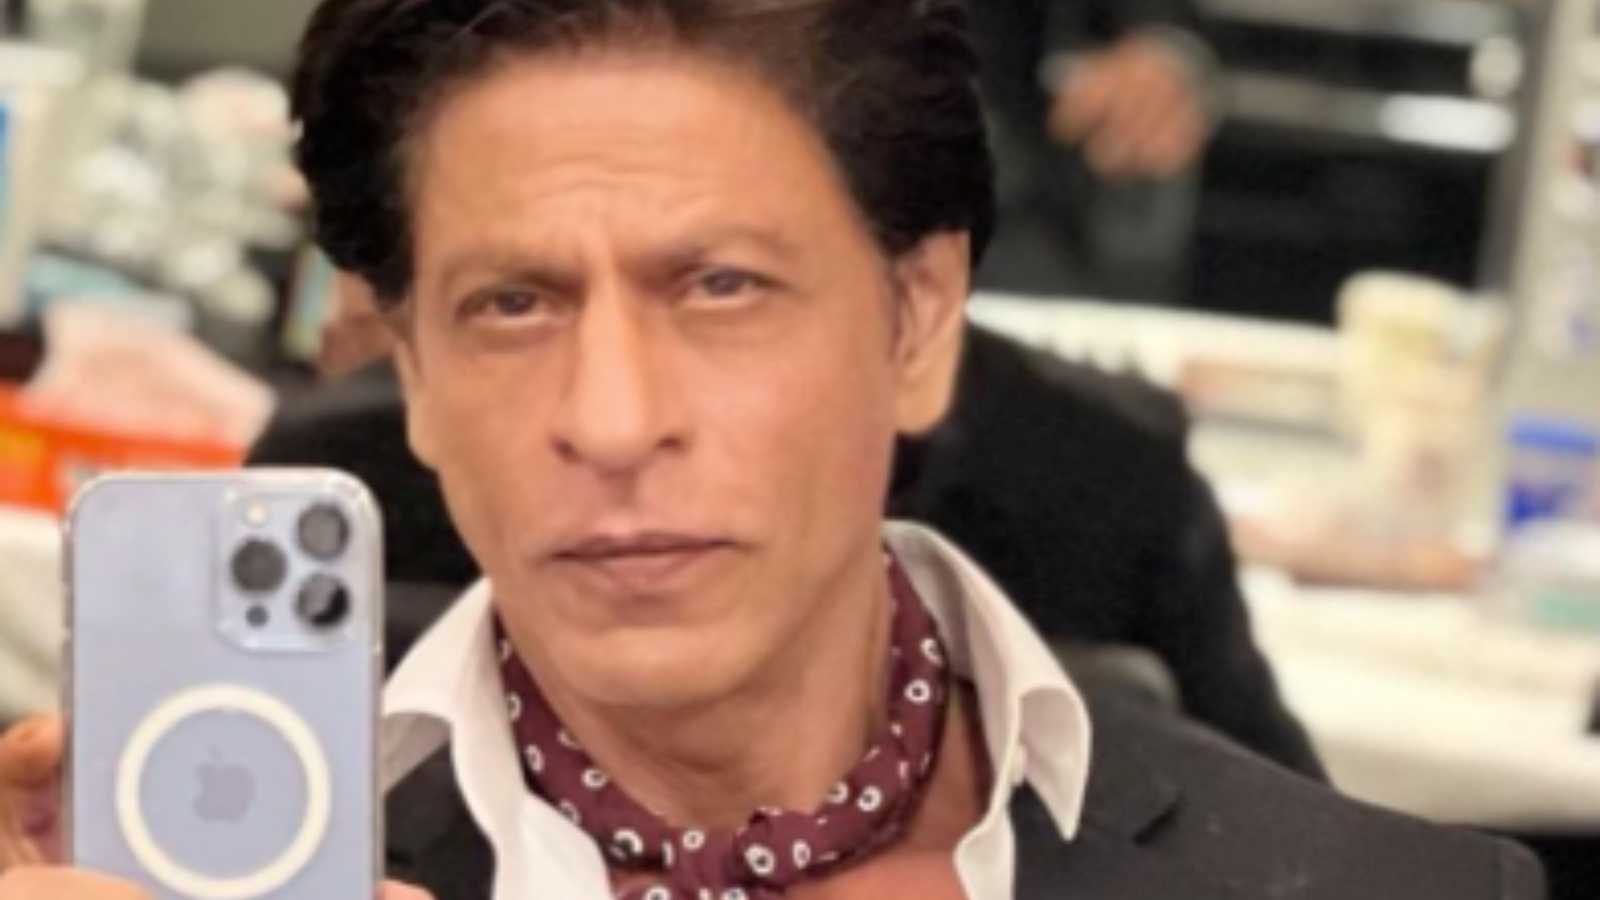 Shah Rukh Khan reveals his favourite Punjabi food, has THIS to say when asked for his kurtas in latest chat session